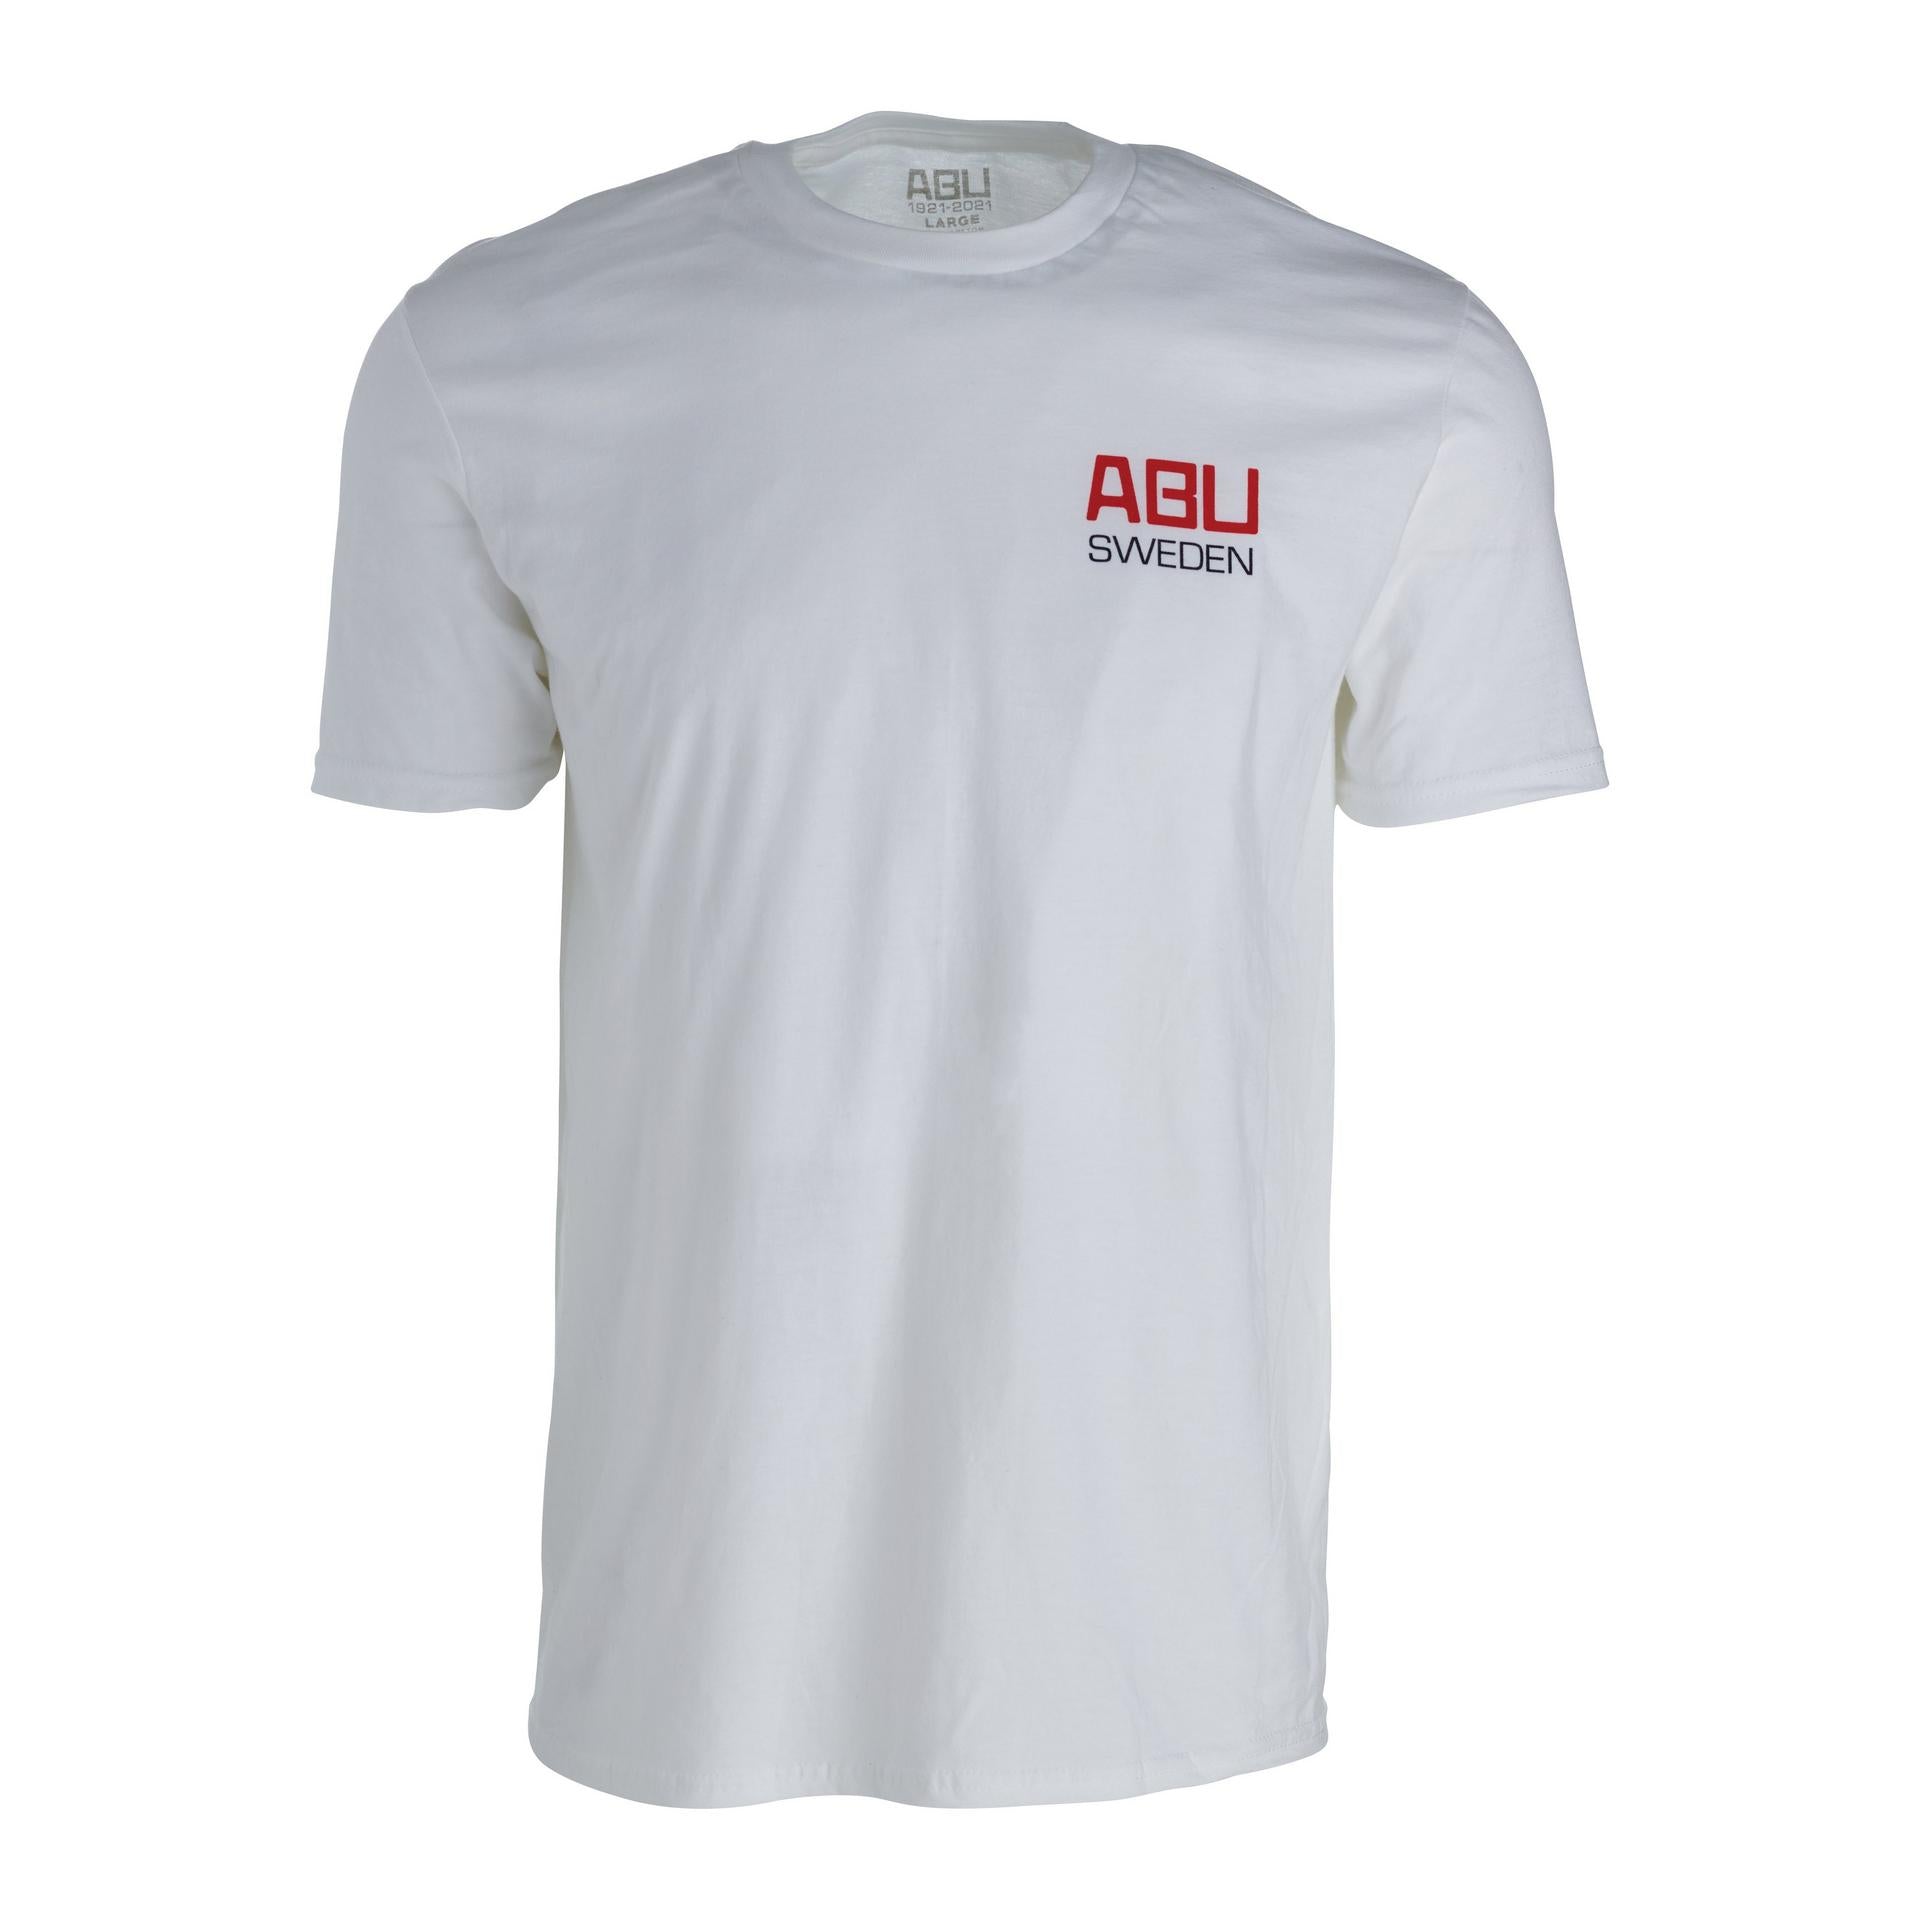 ABU Special Edition Sweden White T-Shirt